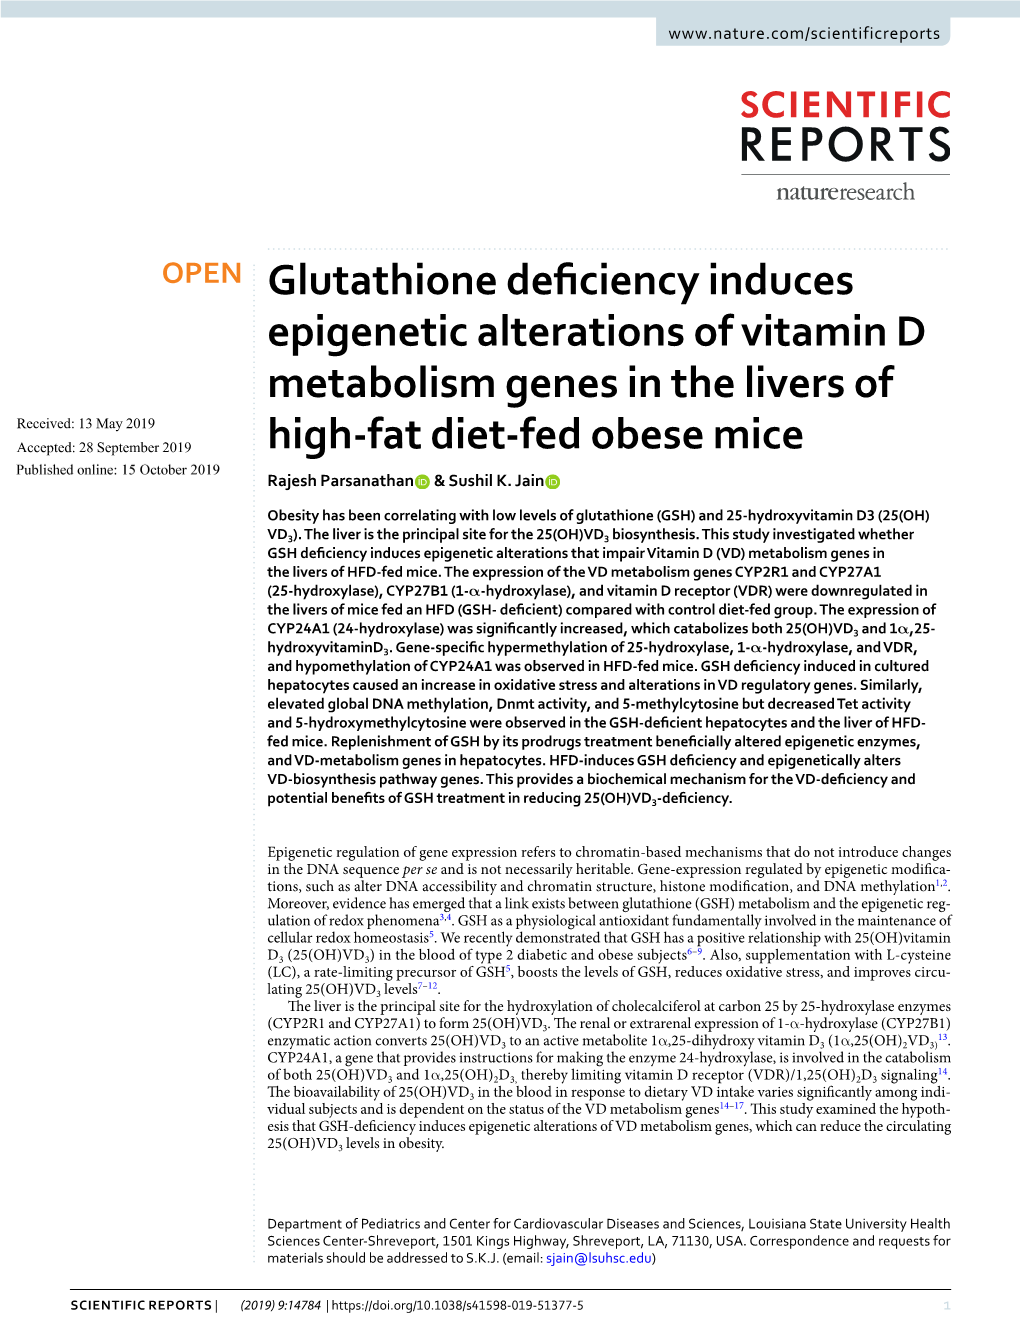 Glutathione Deficiency Induces Epigenetic Alterations of Vitamin D